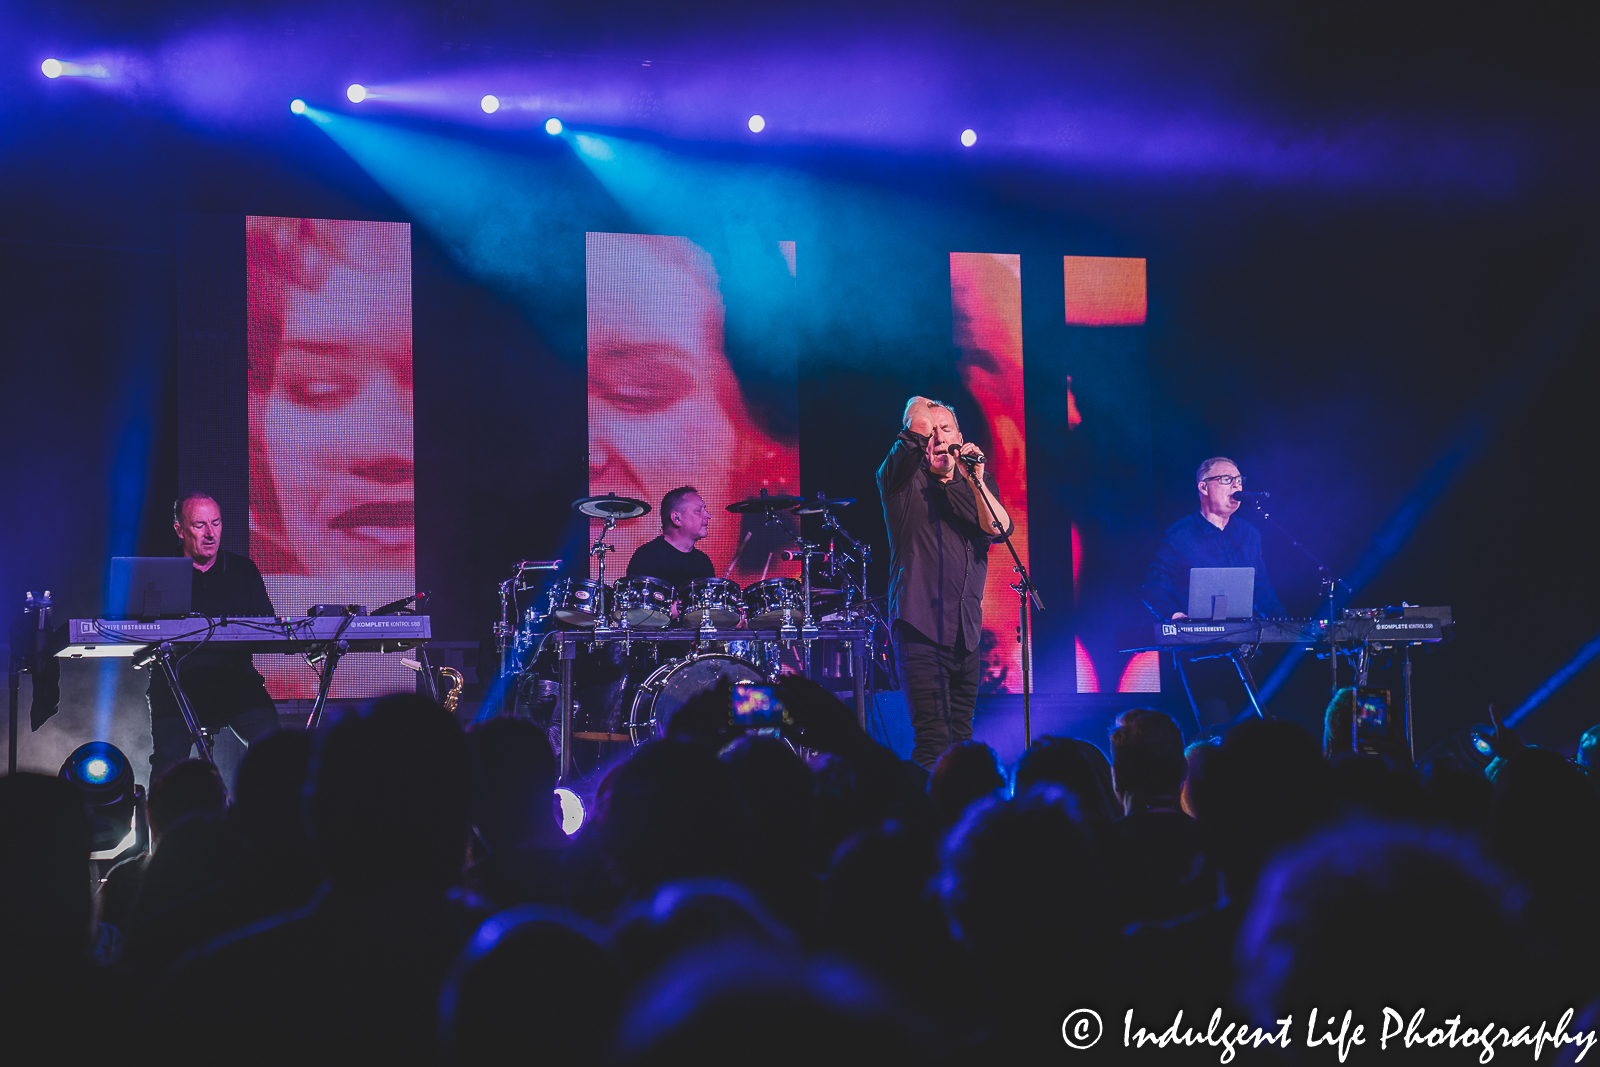 OMD performing "If You Leave" live in concert at The Truman in downtown Kansas City, MO on May 8, 2022.